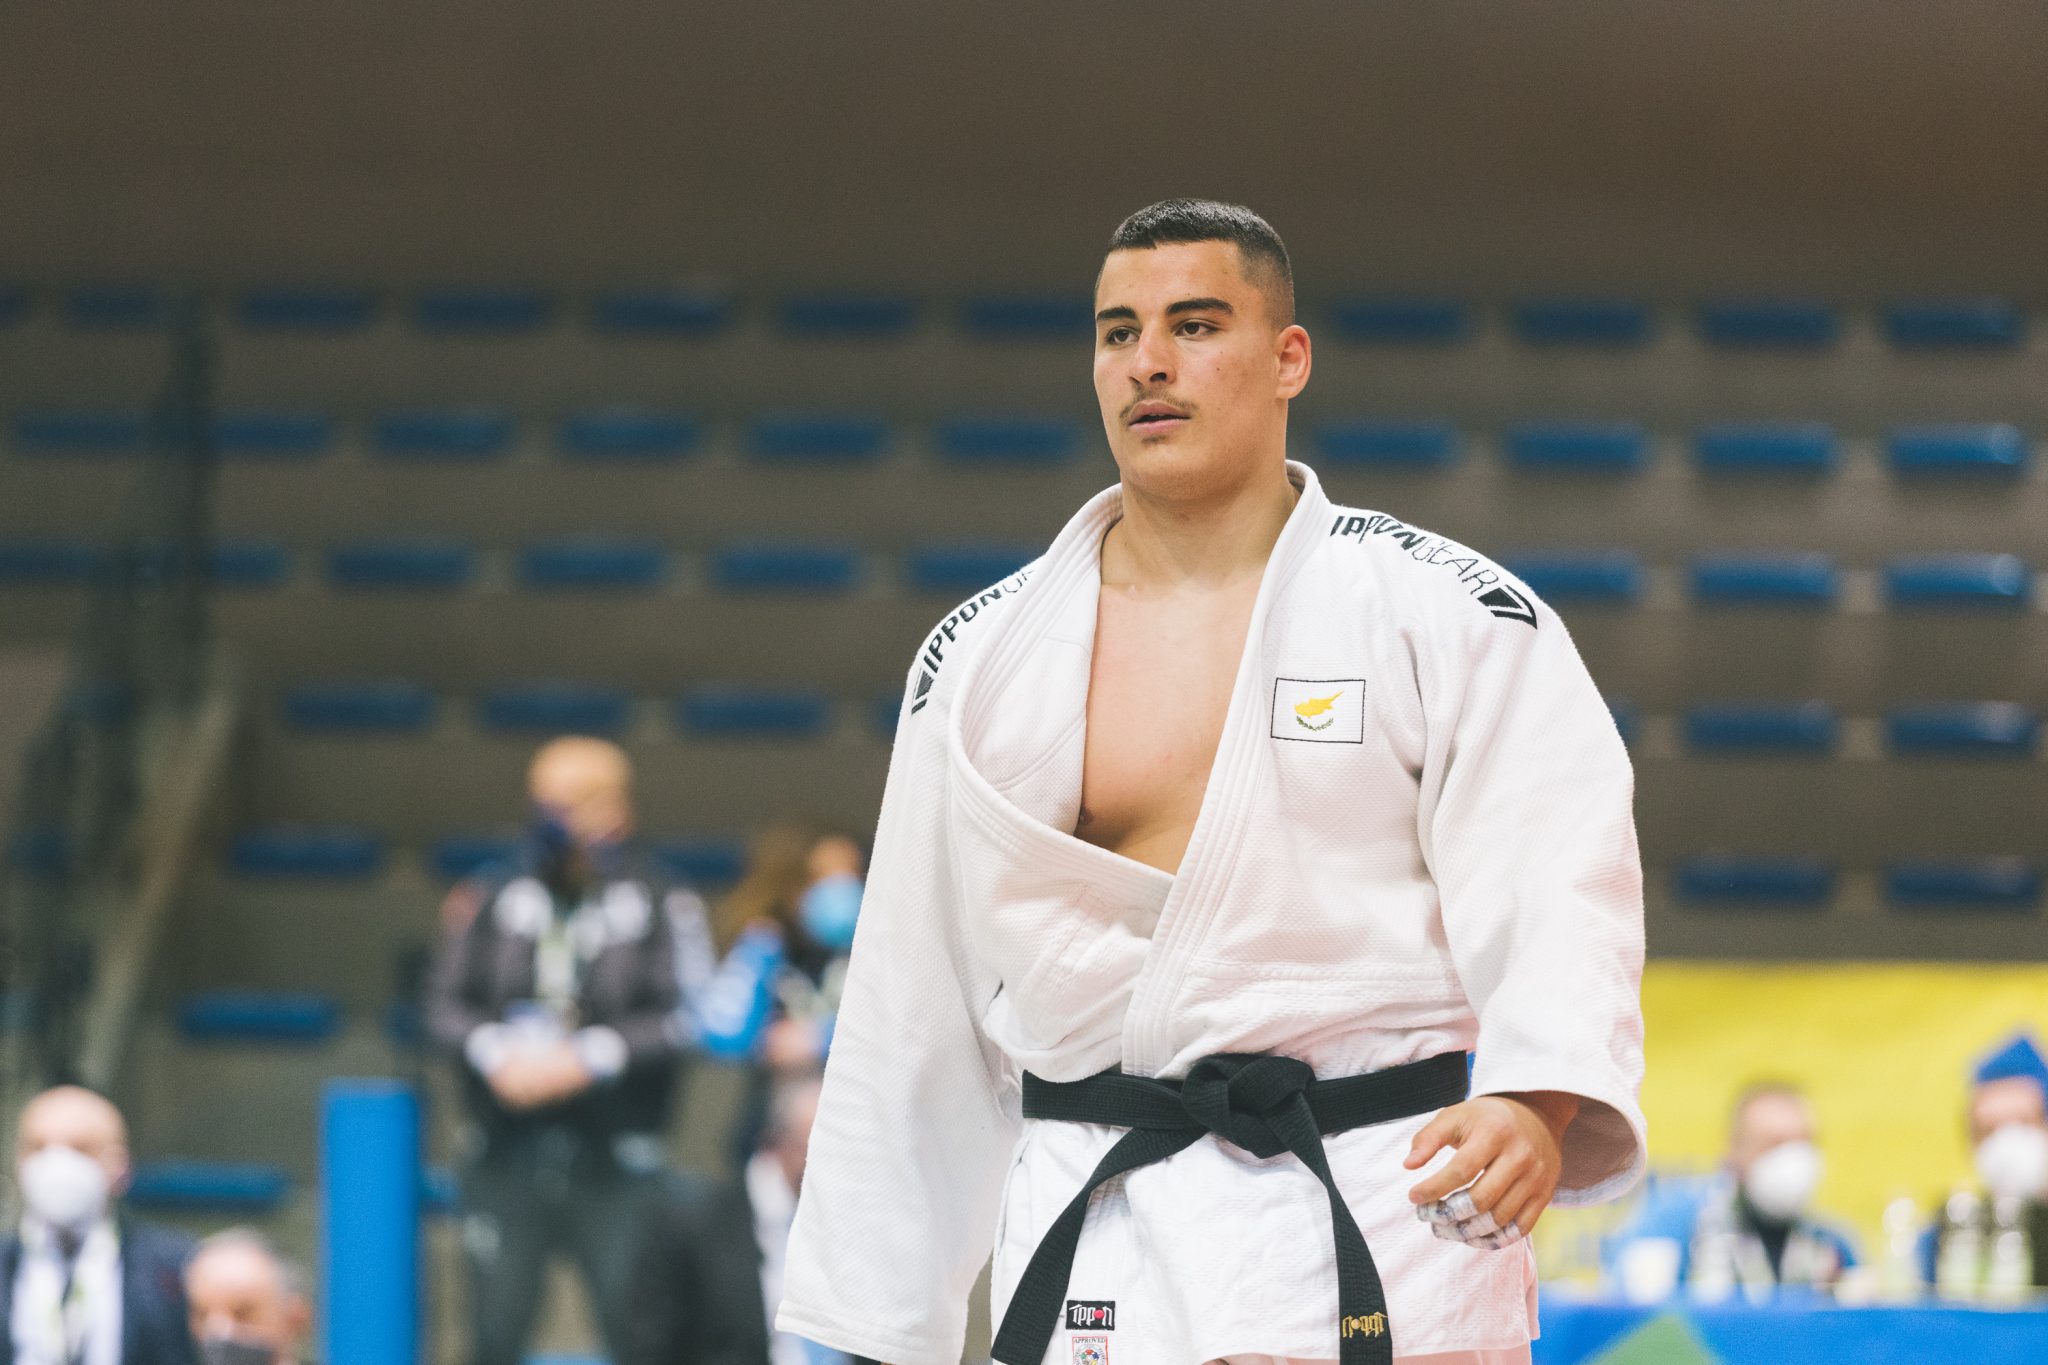 CYPRUS GOES WITHOUT FAIL AT THE CADET EUROPEAN CUP OF 2022